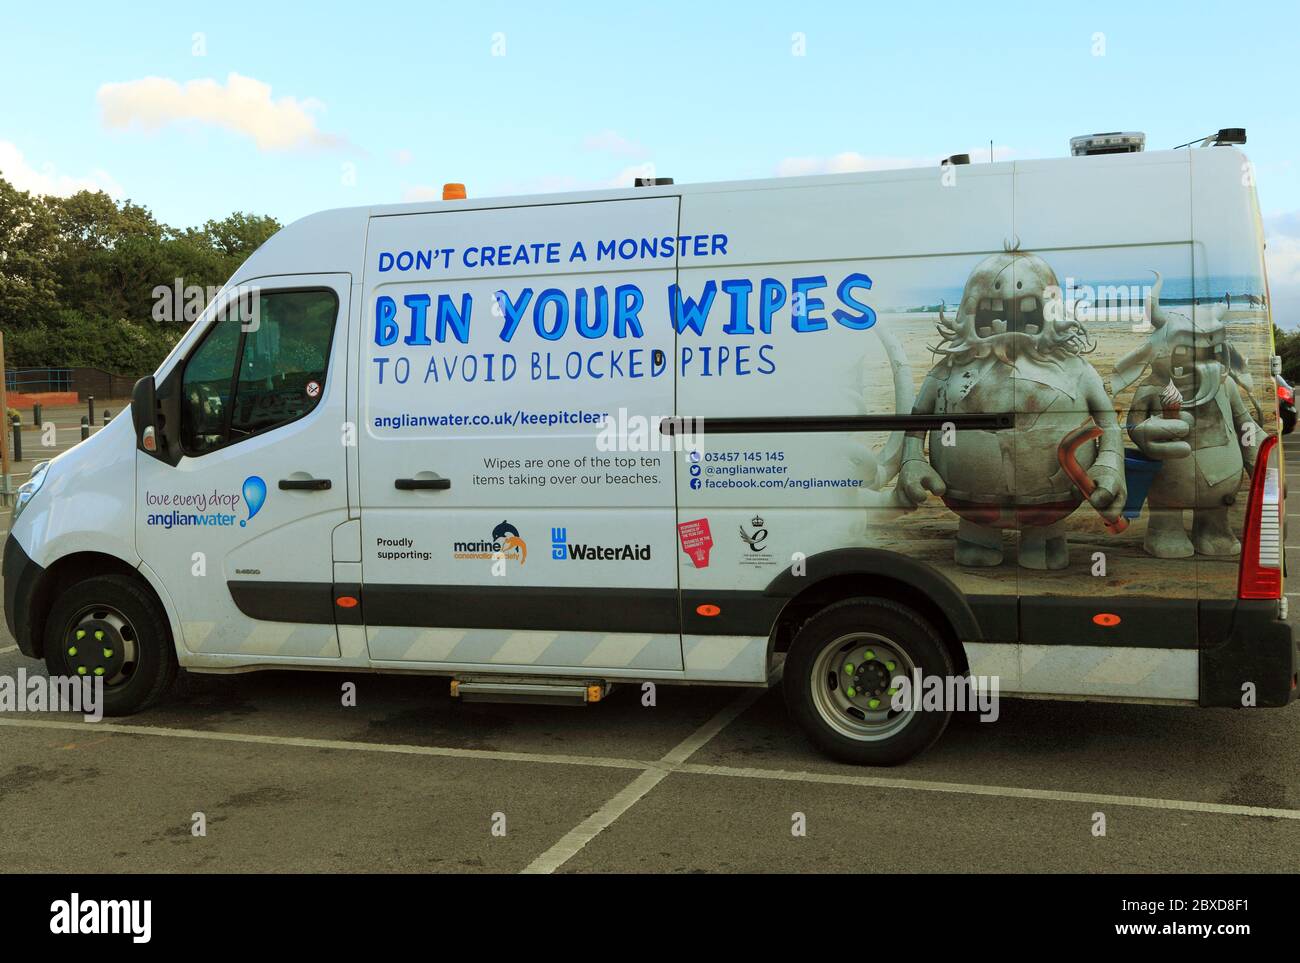 Anglian Water, van, vehicle, water company, Bin Your Wipes, Don't Create A Monster, Norfolk, England Stock Photo